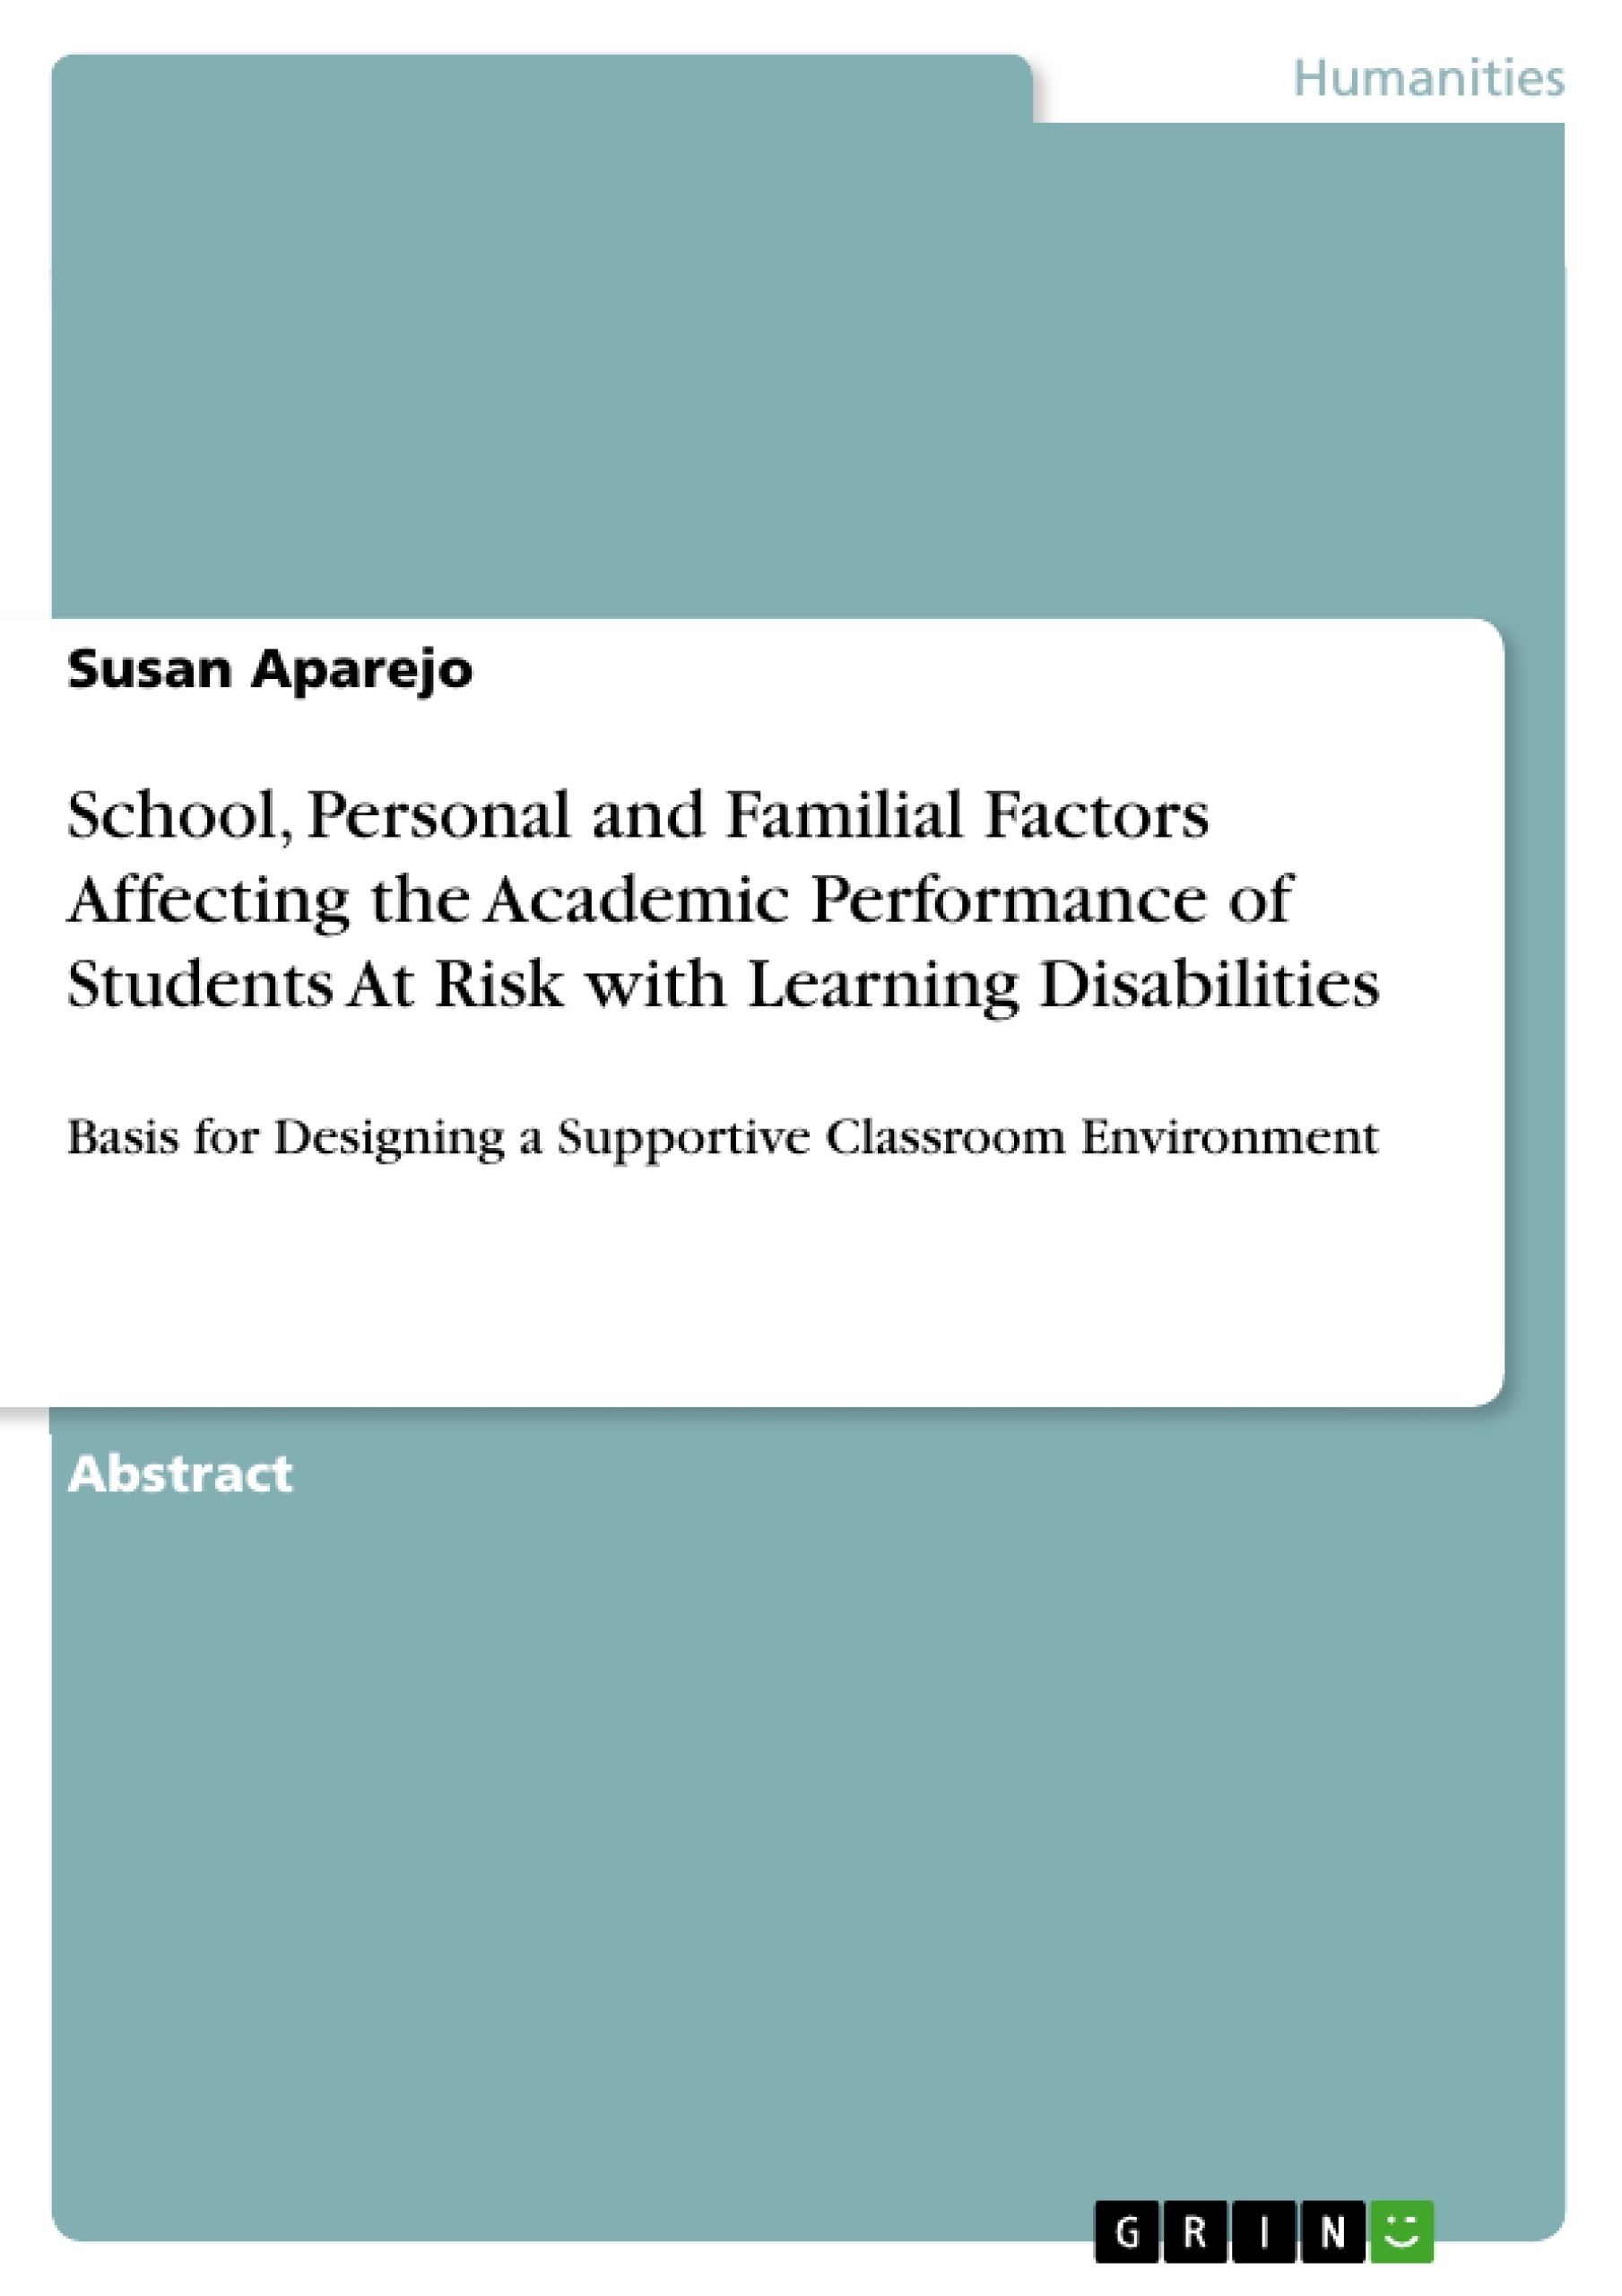 Title: School, Personal and Familial Factors Affecting the Academic Performance of Students At Risk with Learning Disabilities